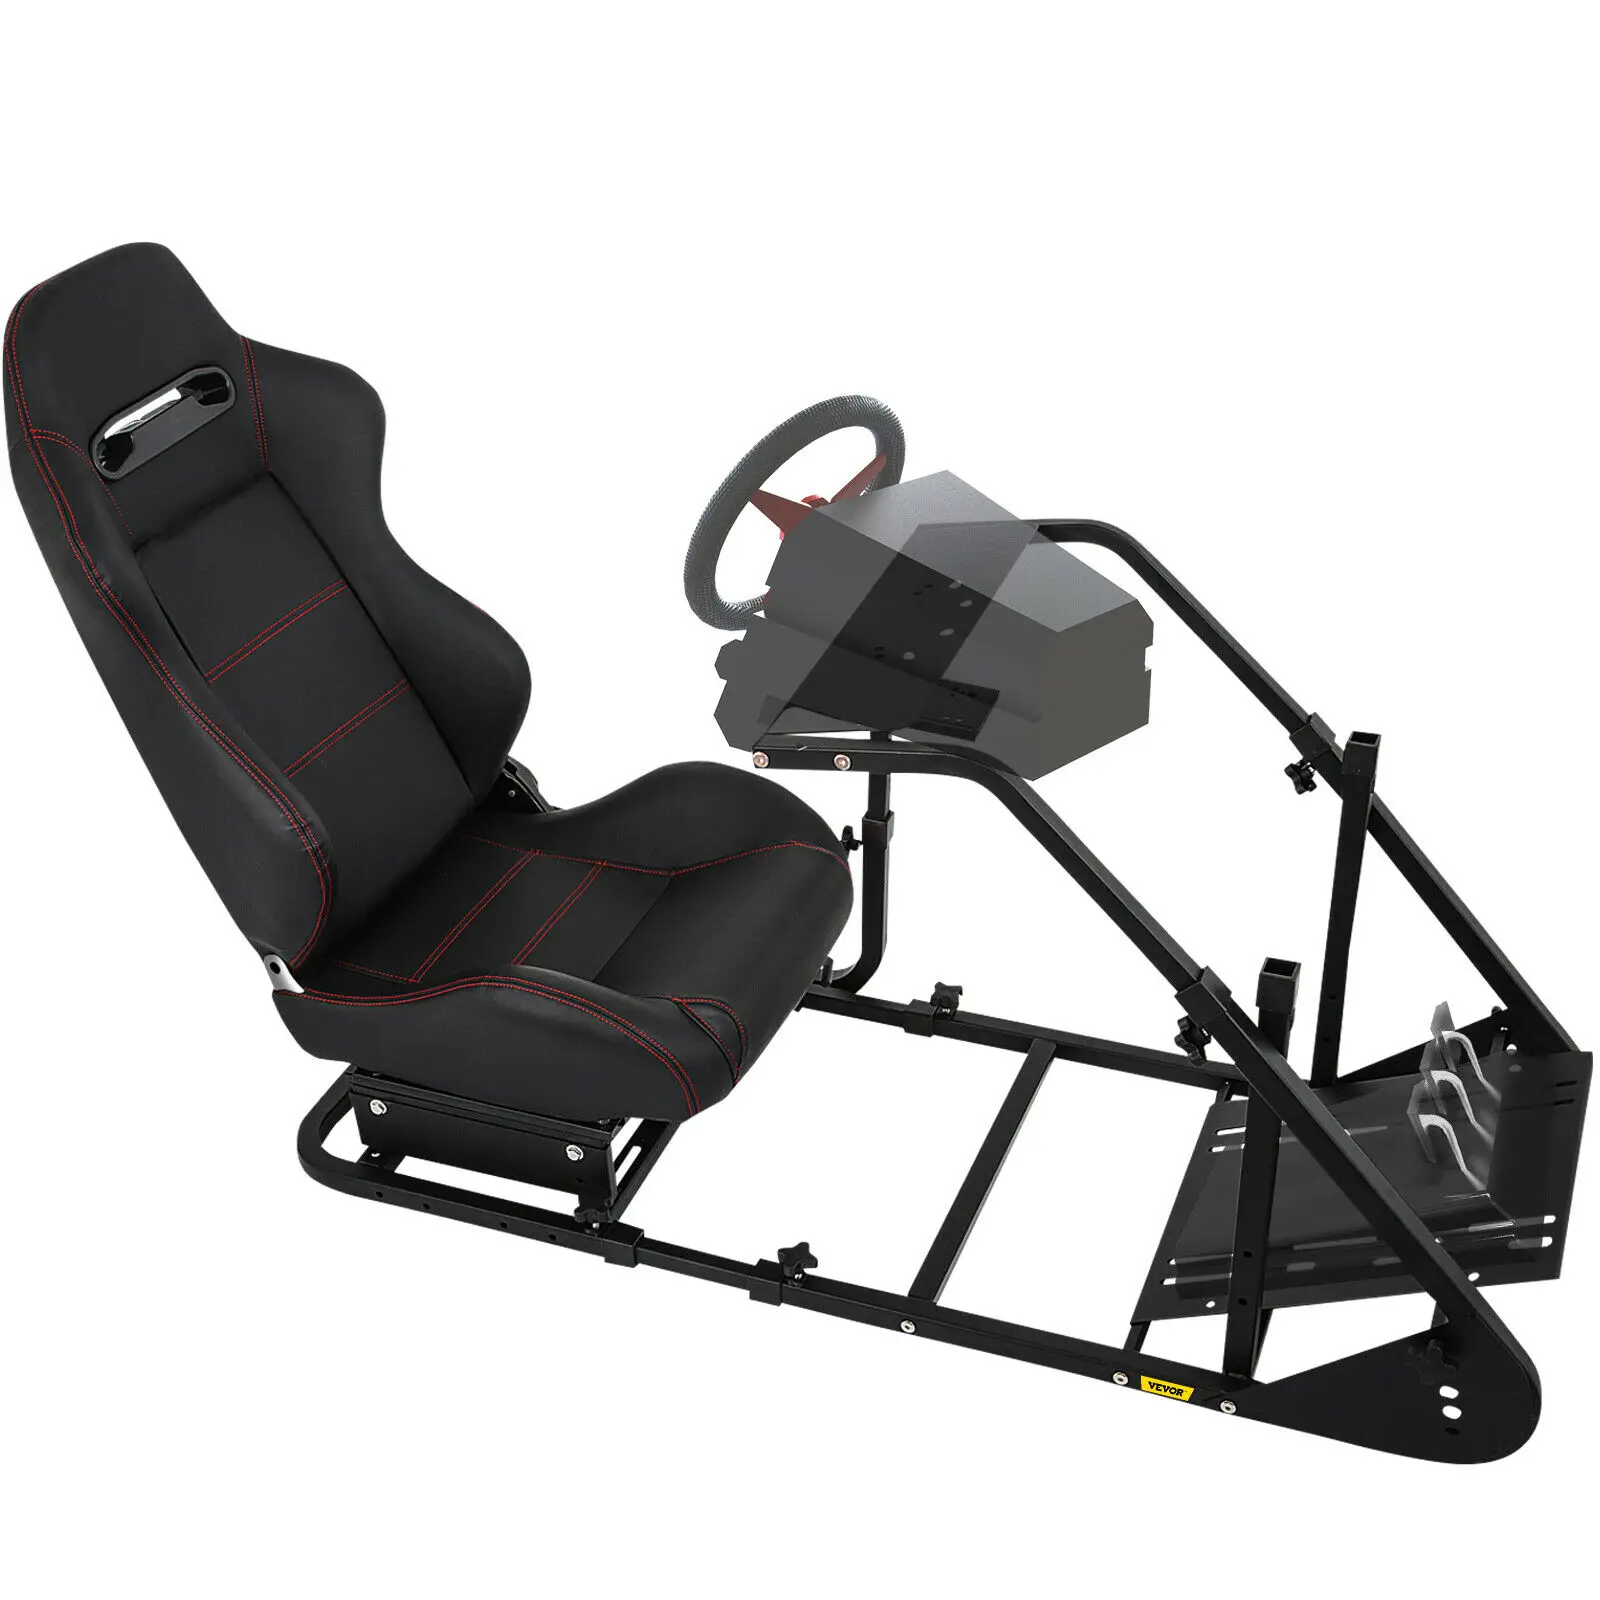 Wholesale RS6 Racing Cockpit Chair Stand For G29/G920/PS3/PS4 From m.alibaba.com